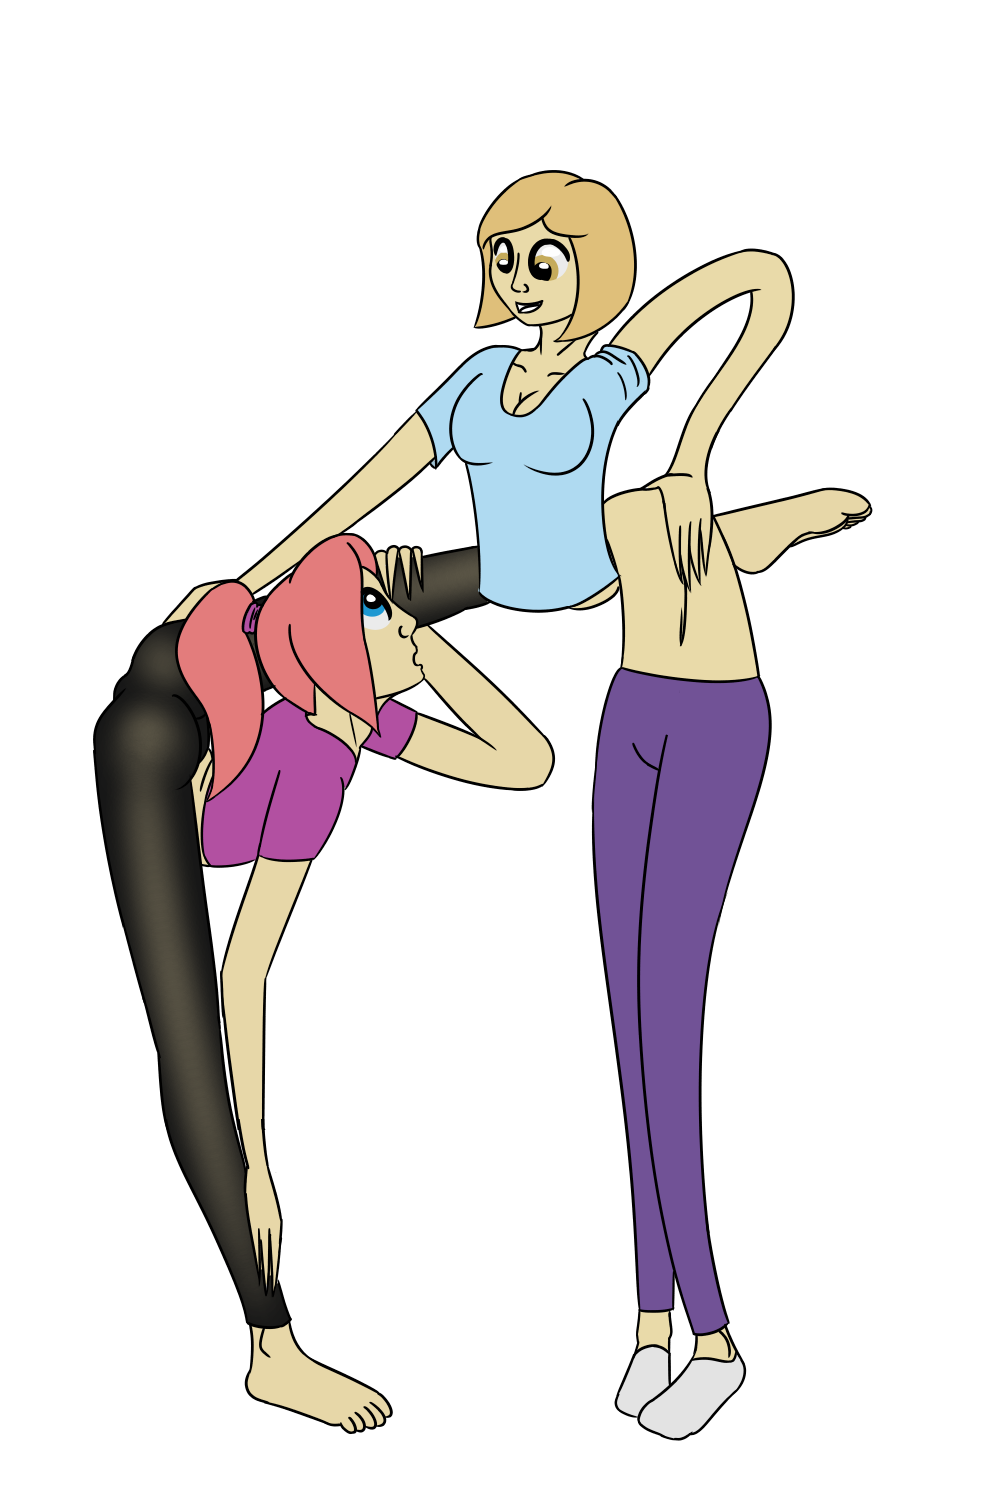 The Two Types Of Stretchy By WanderTones On DeviantArt.